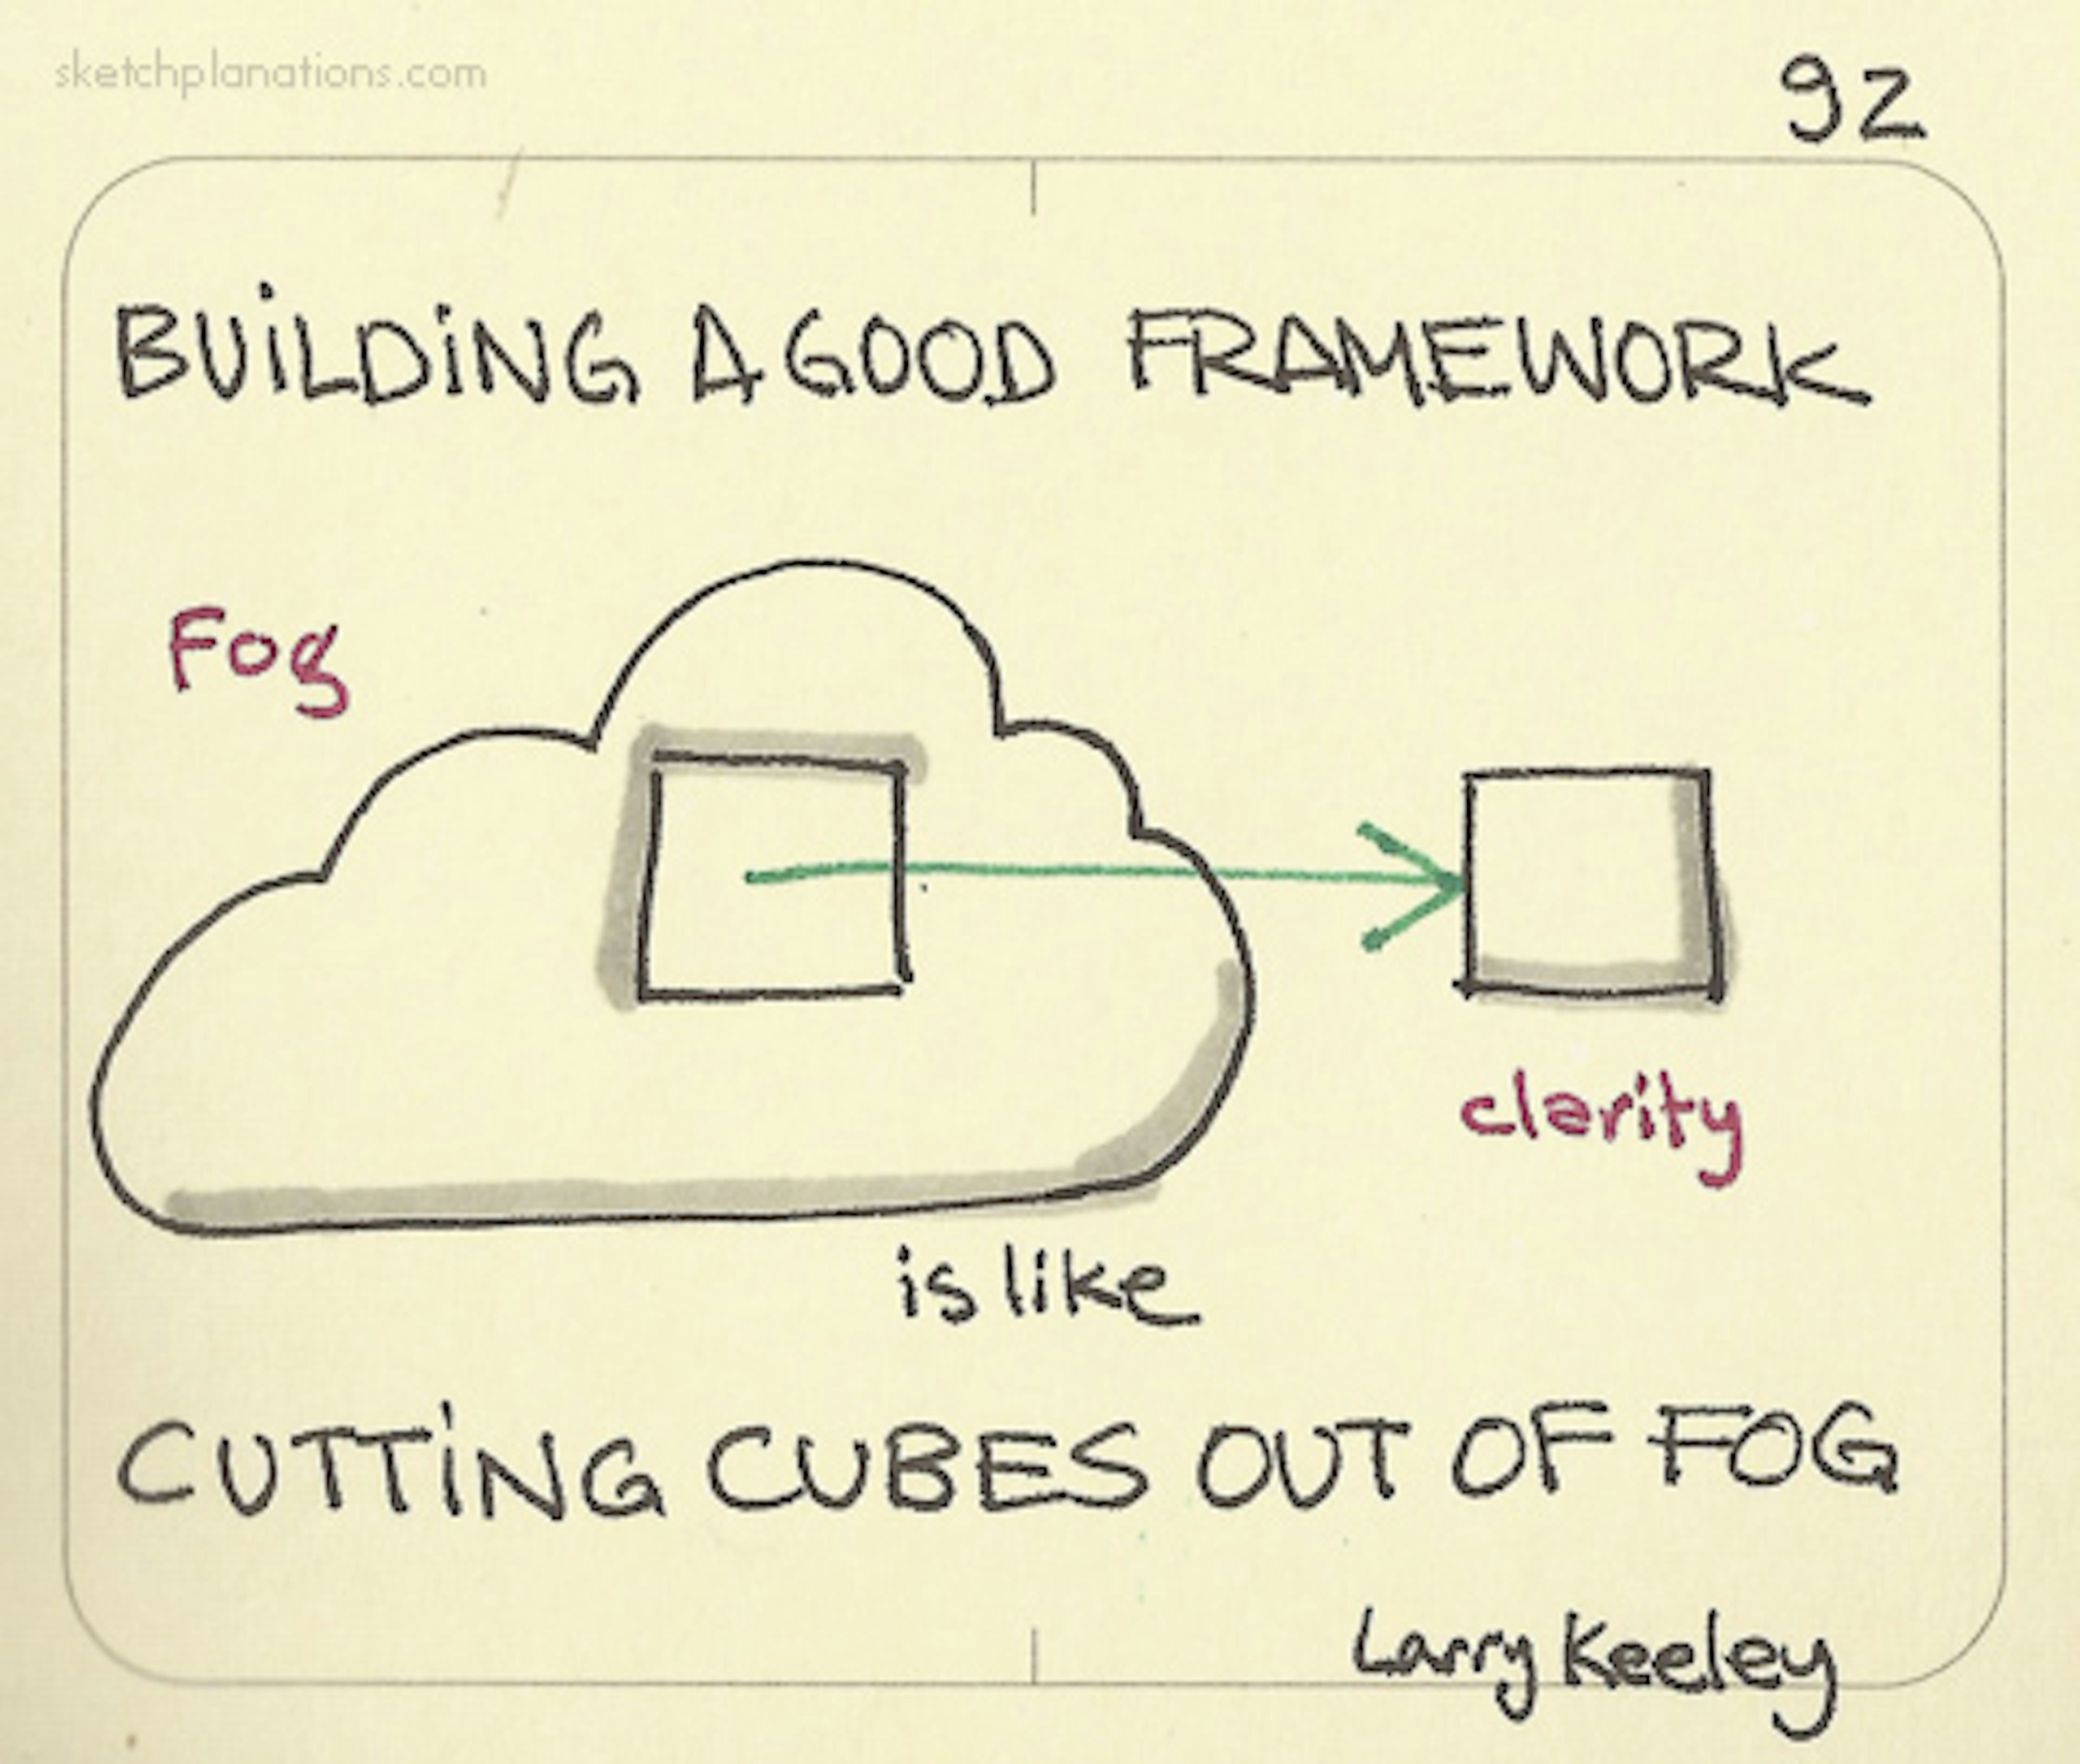 Building a good framework is like cutting cubes out of fog — Larry Keeley - Sketchplanations